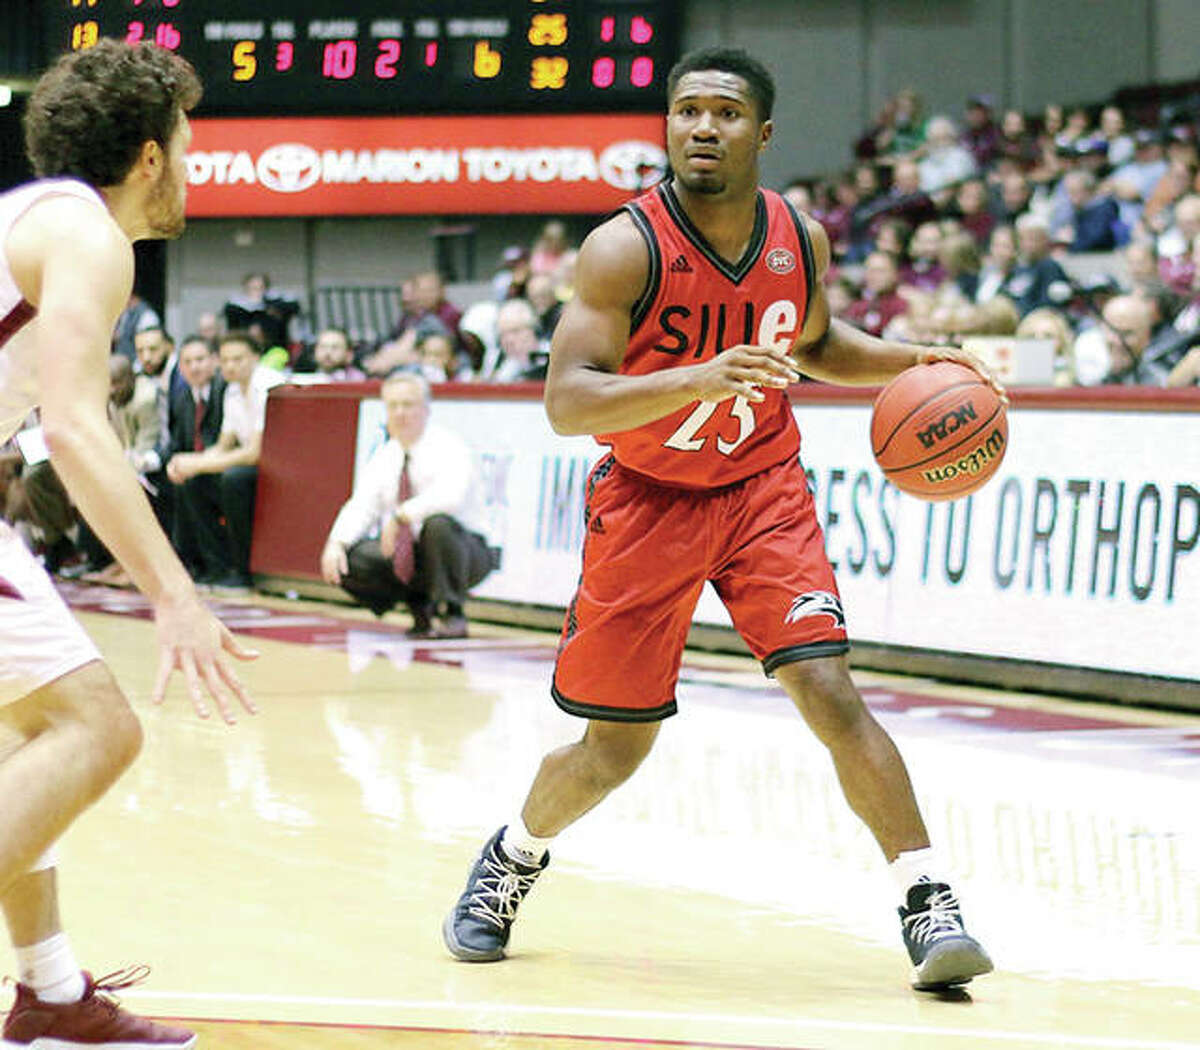 SIUE’s Jalen Henry (12) scored 16 points to lead the Cougars in their last game, an 86-71 defeat Sunday at Fort Wayne. SIUE will look to end a four-game skid Wednesday night at IUPUI. He is shown in action last week in action at SIU Carbondale.